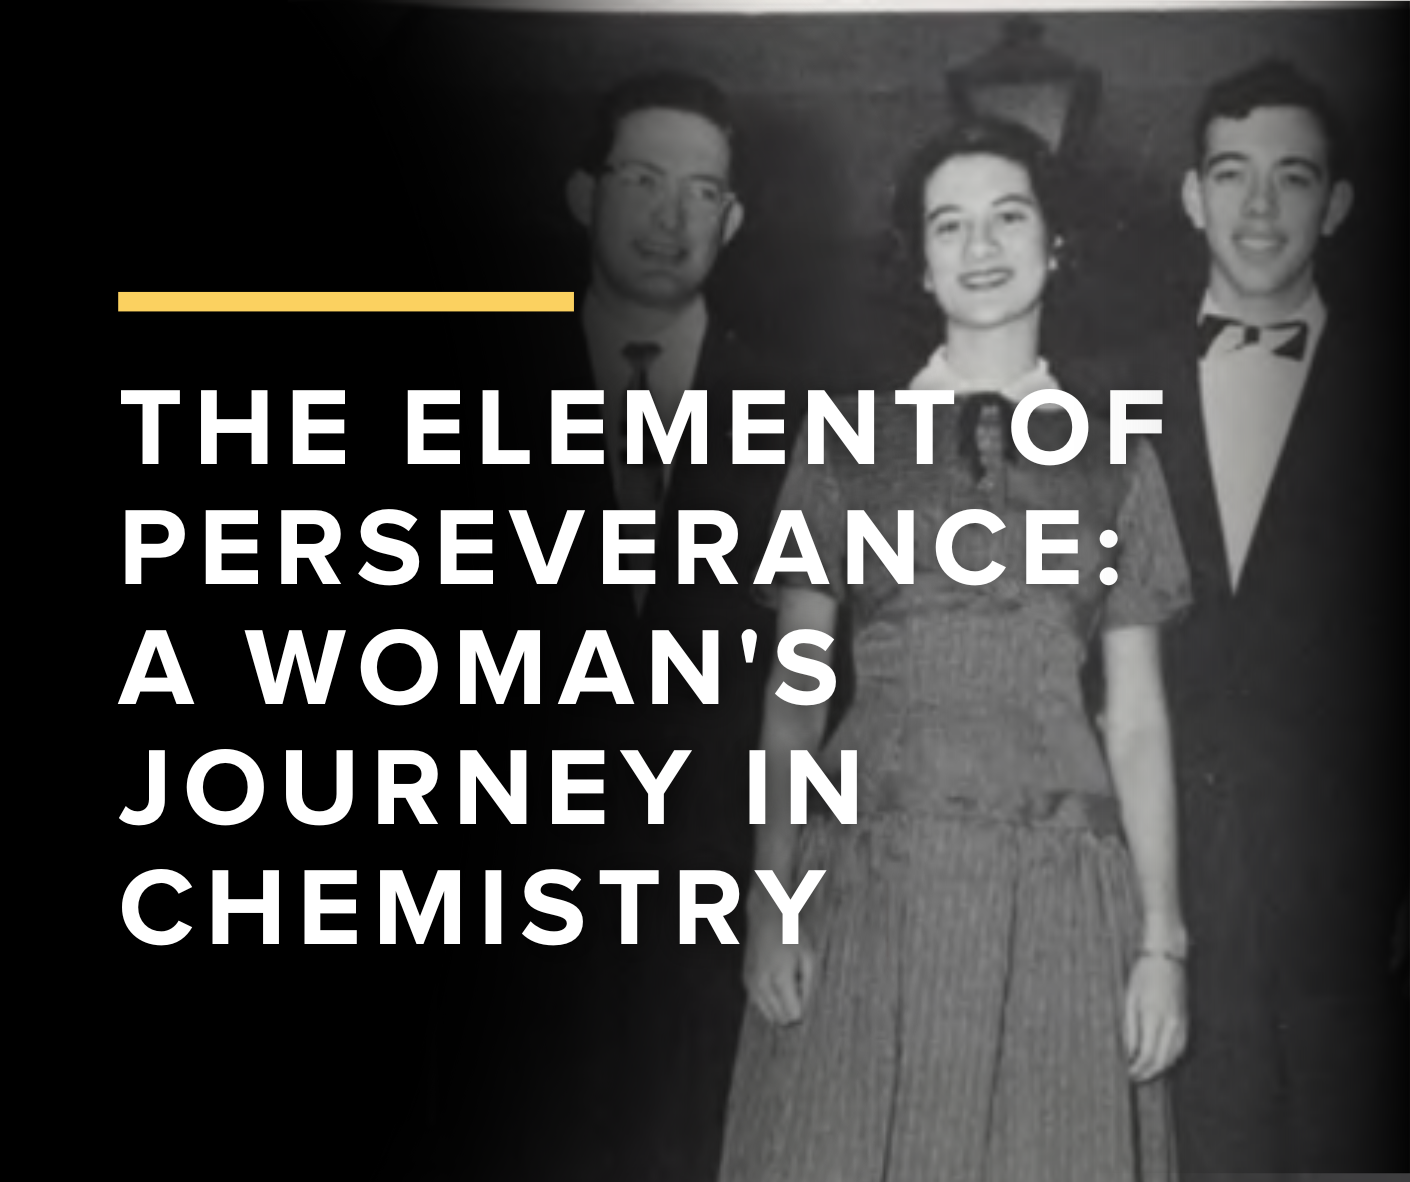 text: "The Element of Perseverance: A Woman's Journey in Chemistry" with a picture of Dr. Mamantov